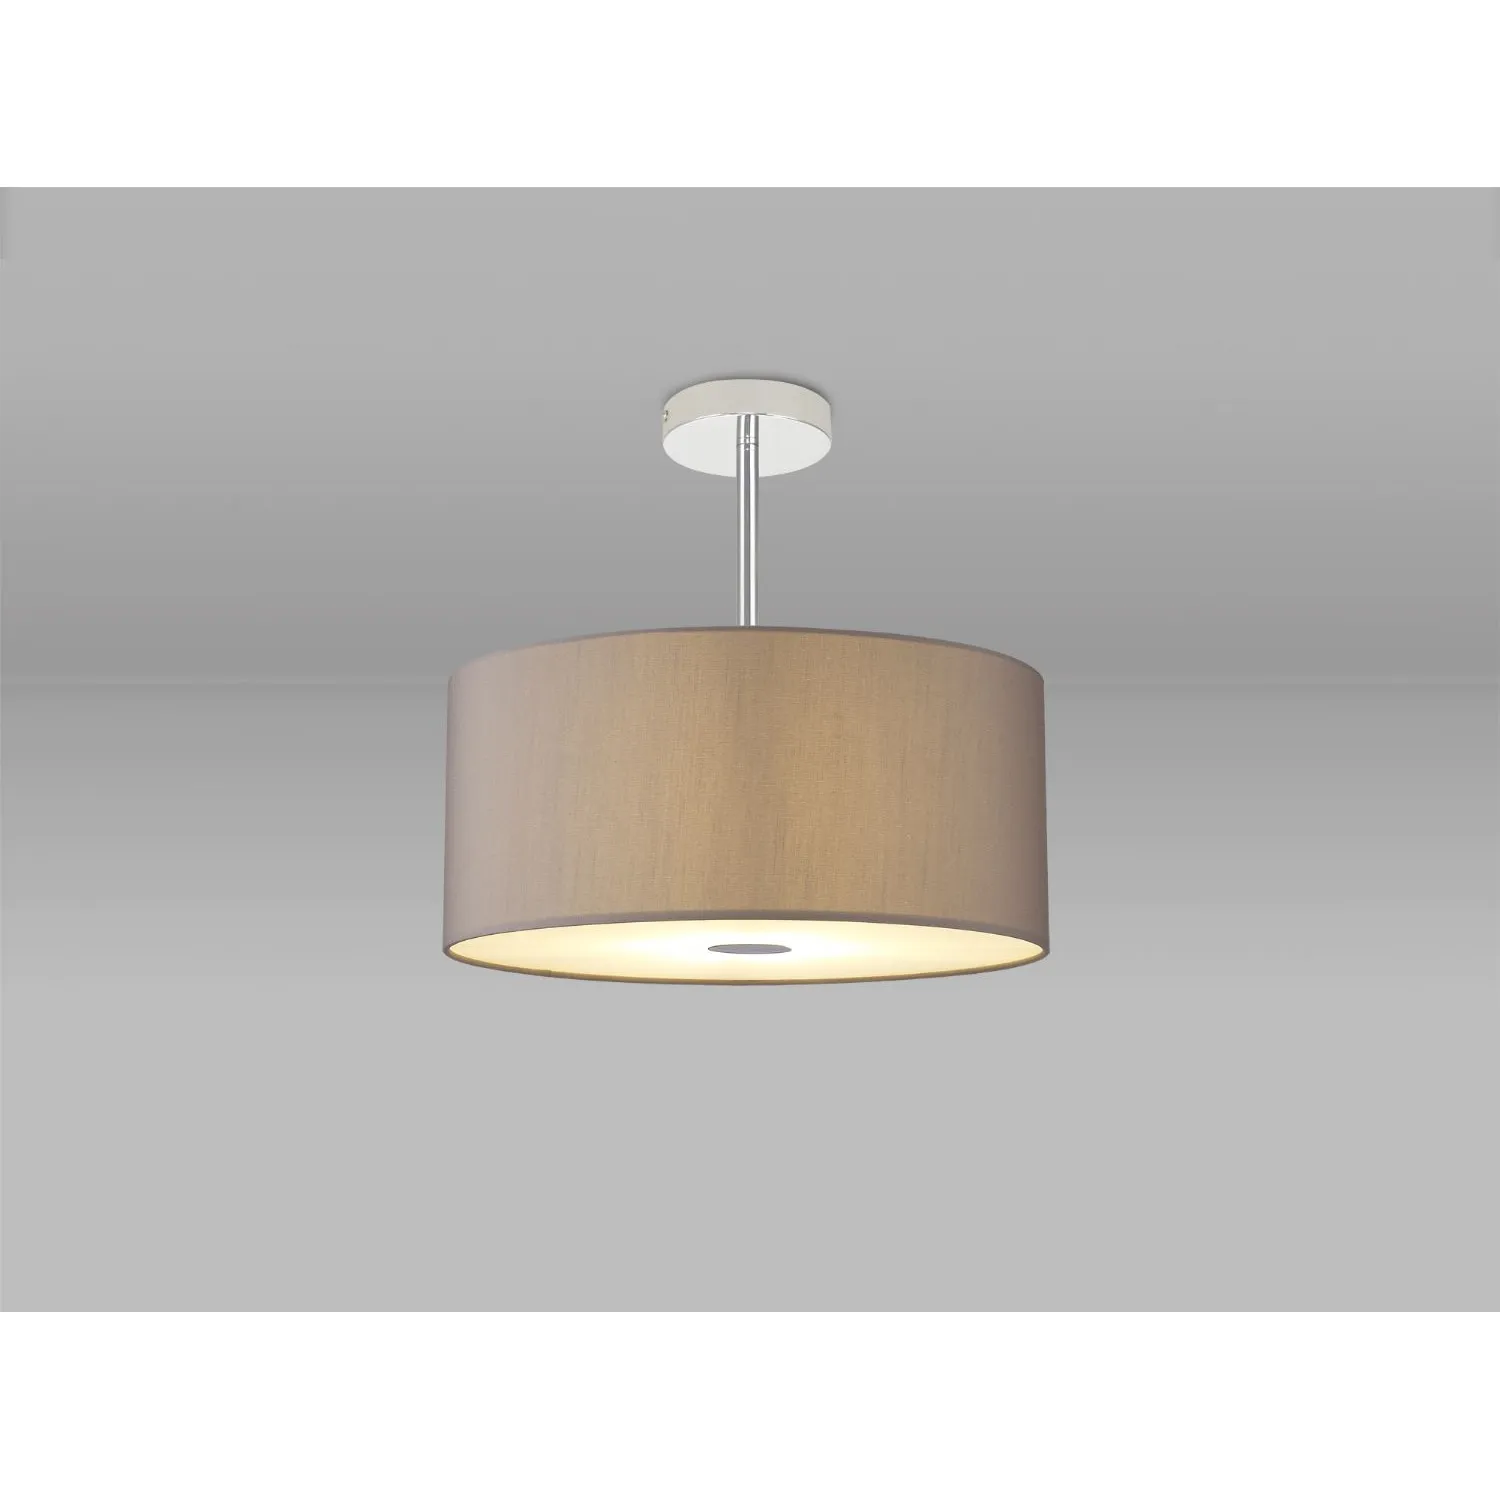 Baymont Polished Chrome 3 Light E27 Semi Flush c w 400 Faux Silk Fabric Shade, Grey White Laminate And 400mm Frosted PC Acrylic Diffuser